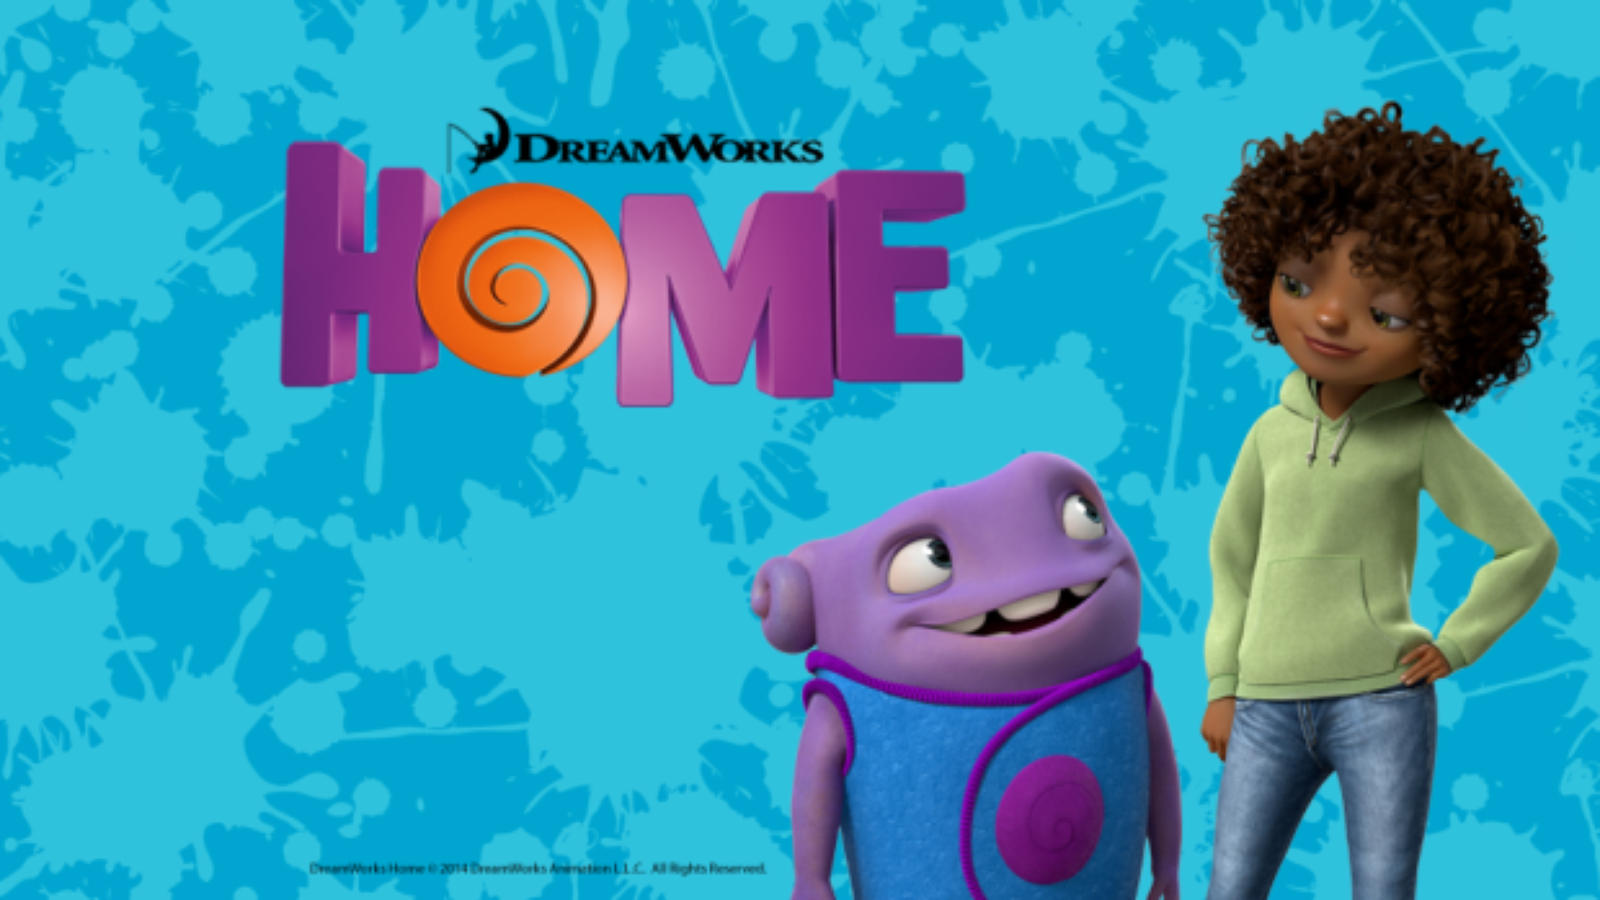 Free download Home Film Home Movie Dreamworks Home Movie Dreamworks